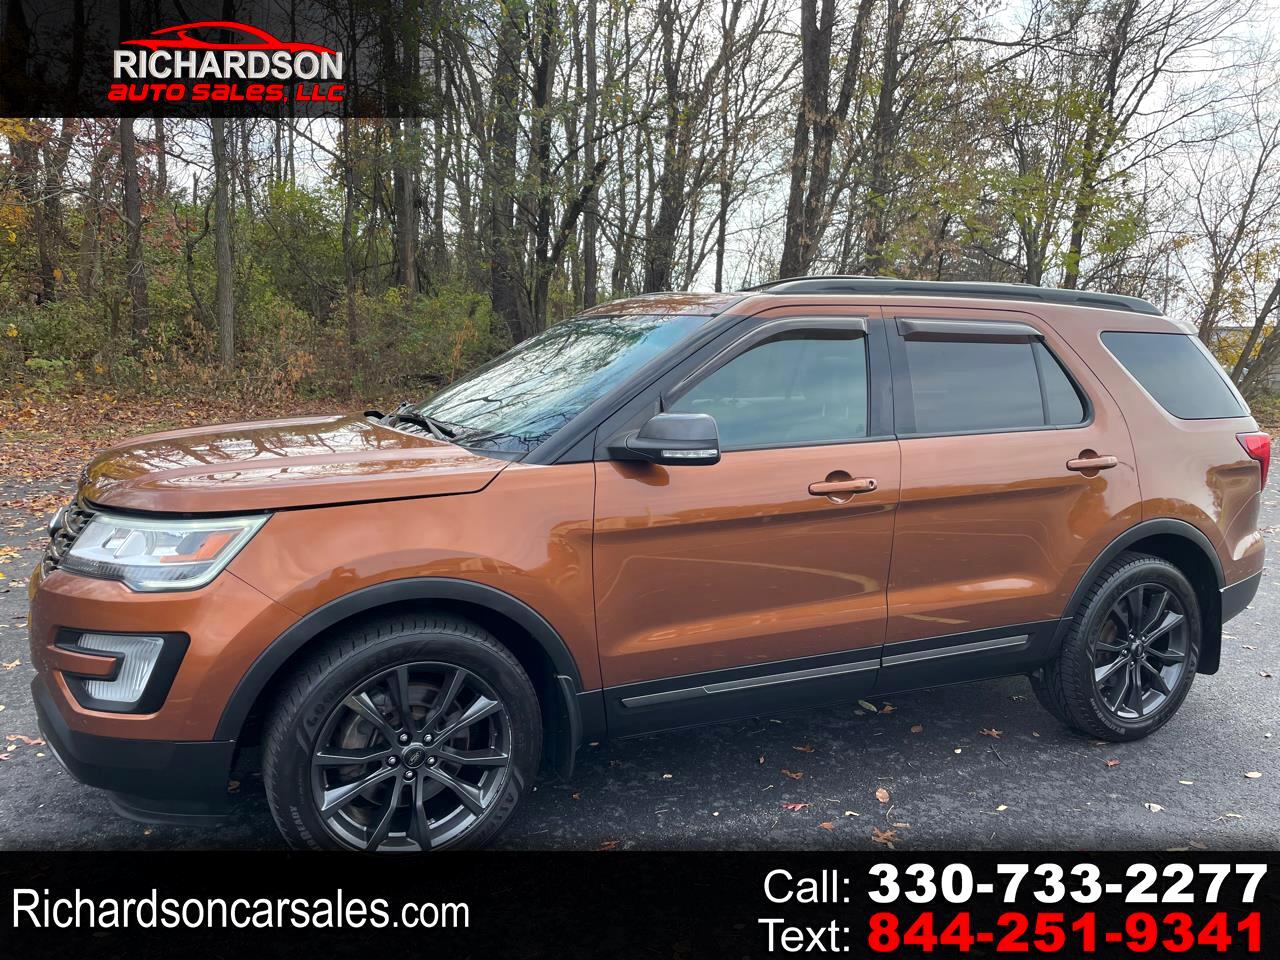 2017 Ford Explorer EcoBoost EXPLORER ECOBOOST XLT SPORT APPEARANCE PACKAGE